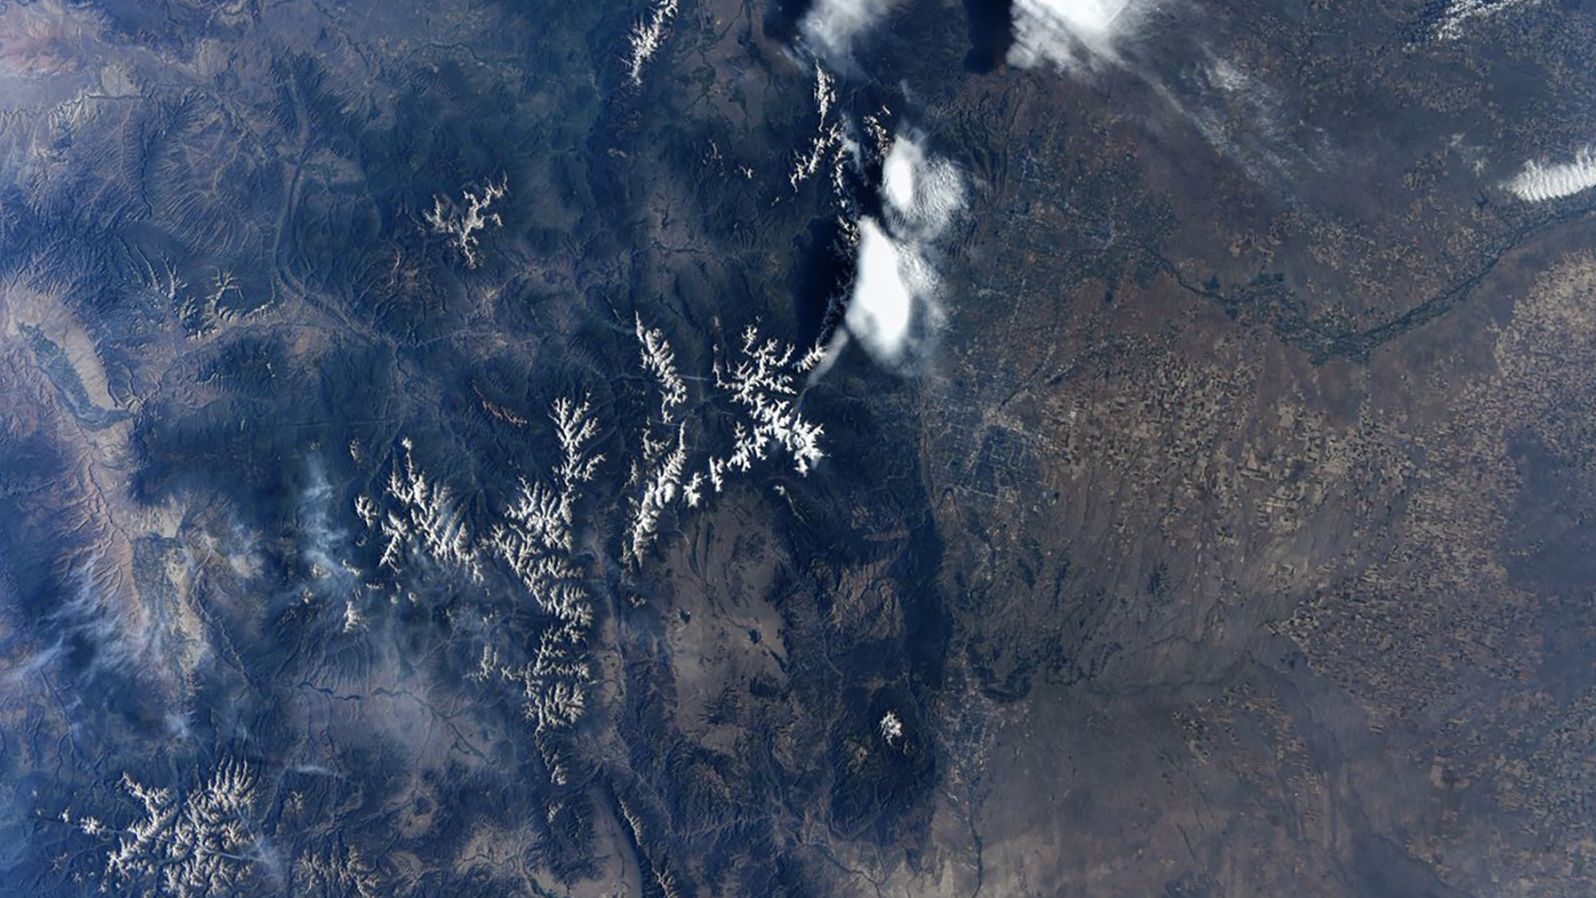 The Rocky Mountains and Denver as seen by Hurley on July 26.